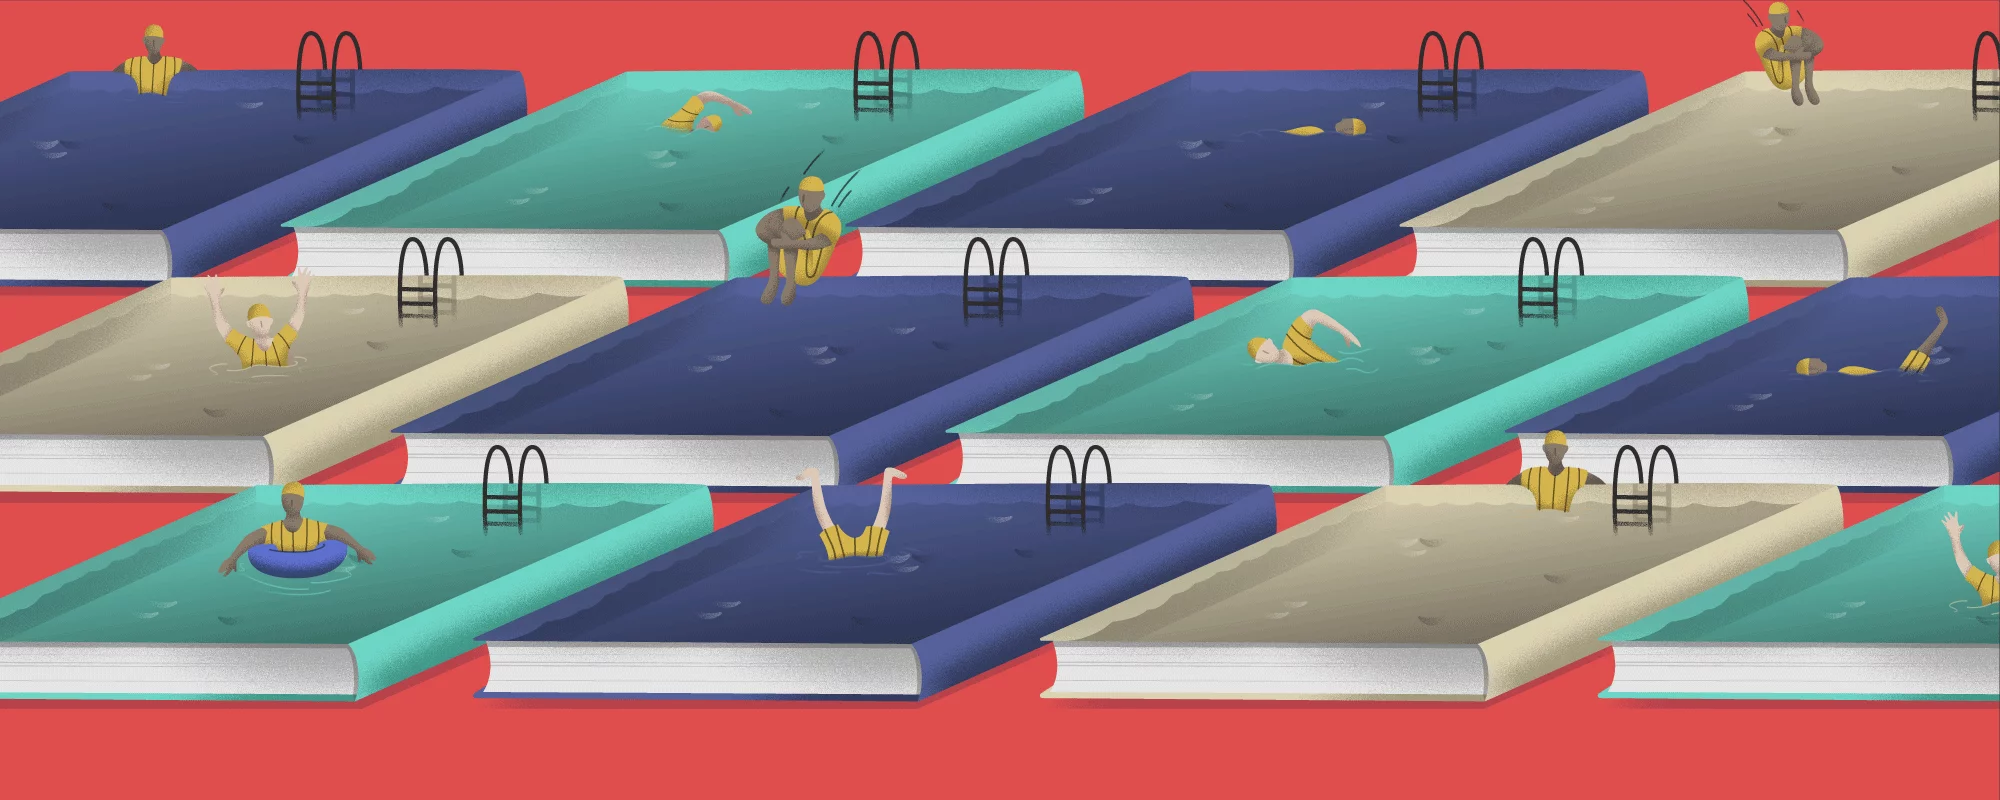 several books laying flat with the cover animated as a pool, with characters diving and swimming into the book